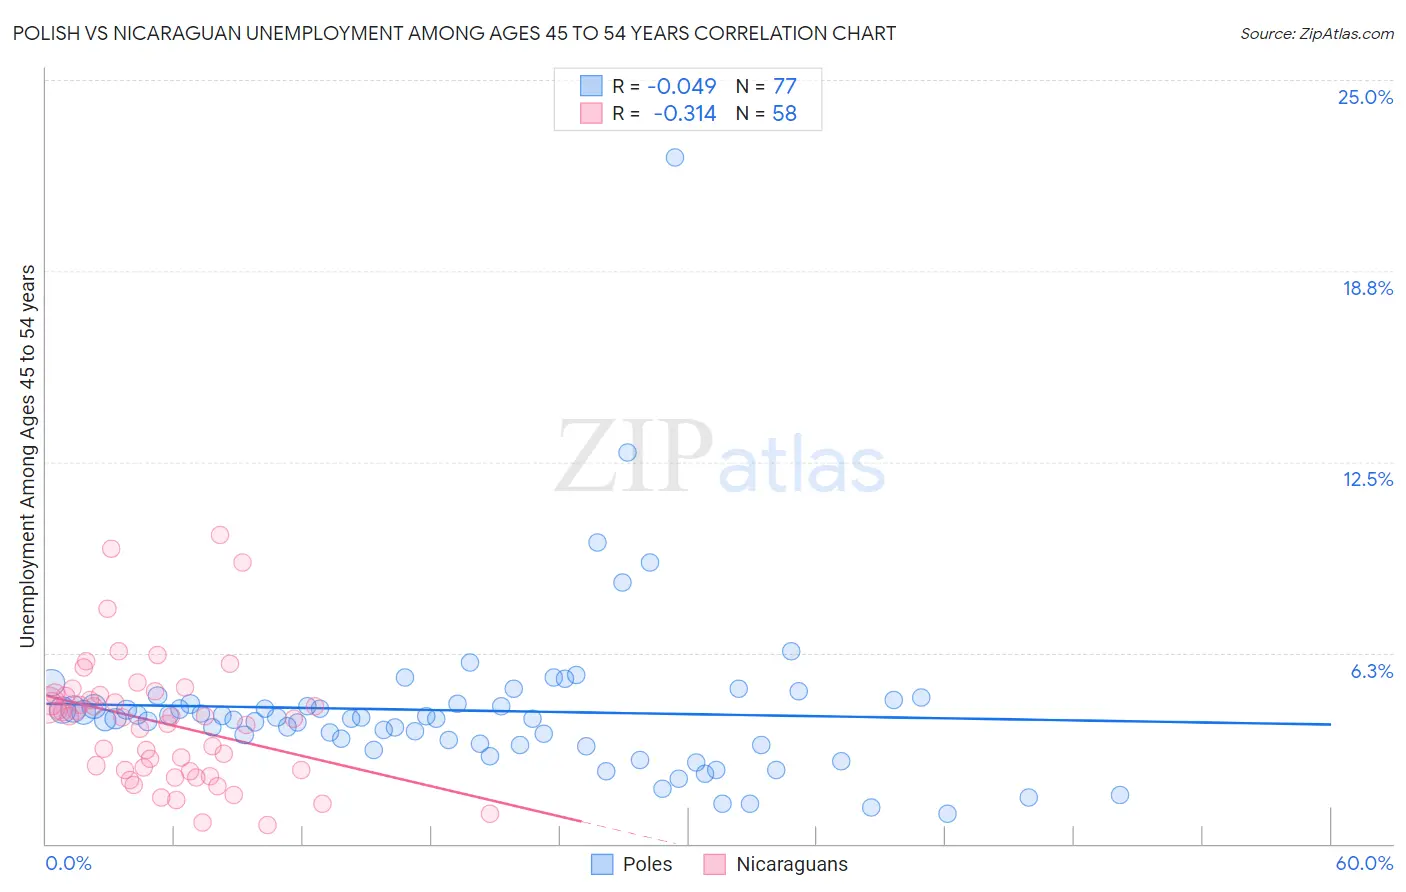 Polish vs Nicaraguan Unemployment Among Ages 45 to 54 years